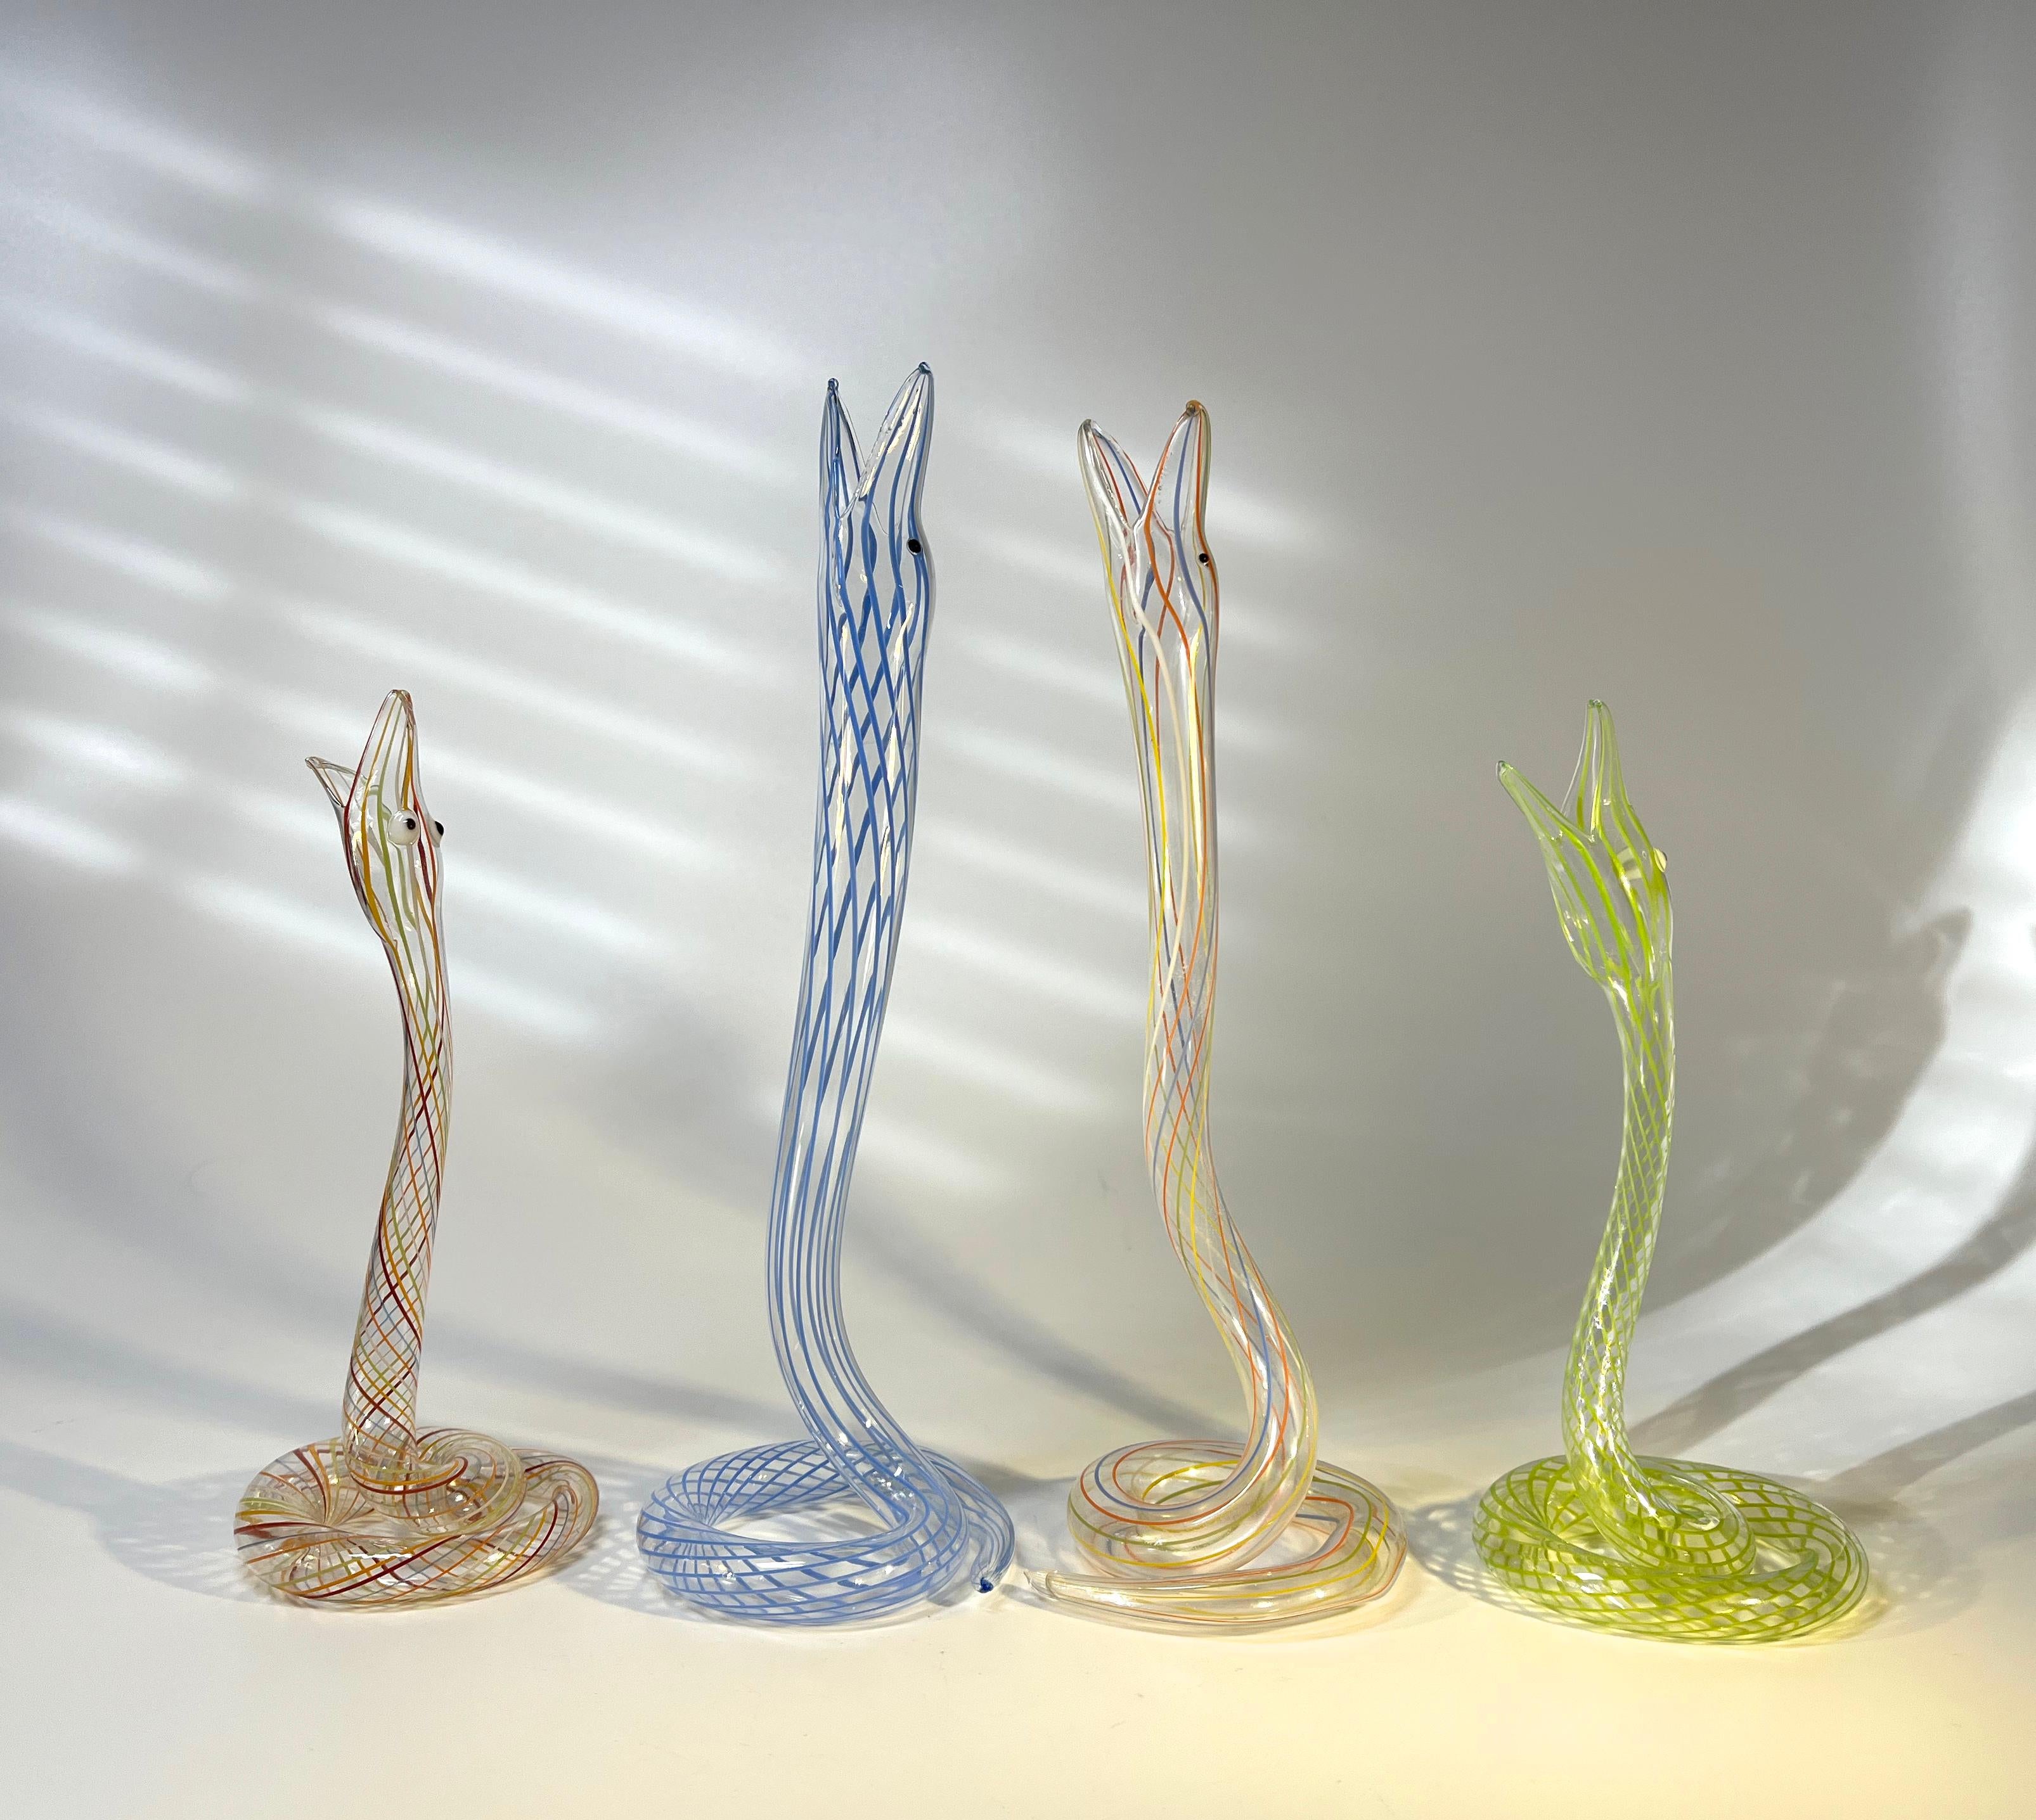 Whimsical gathering of four lamp work Art Deco glass snake vases by Bimini of Austria
Colours are pale blue, mid green and two multi-coloured
Circa 1920 - 1930
Measures: Tall Snakes Height 8 inch, Diameter 2.75 inch
Small Snakes Height 6 inch,